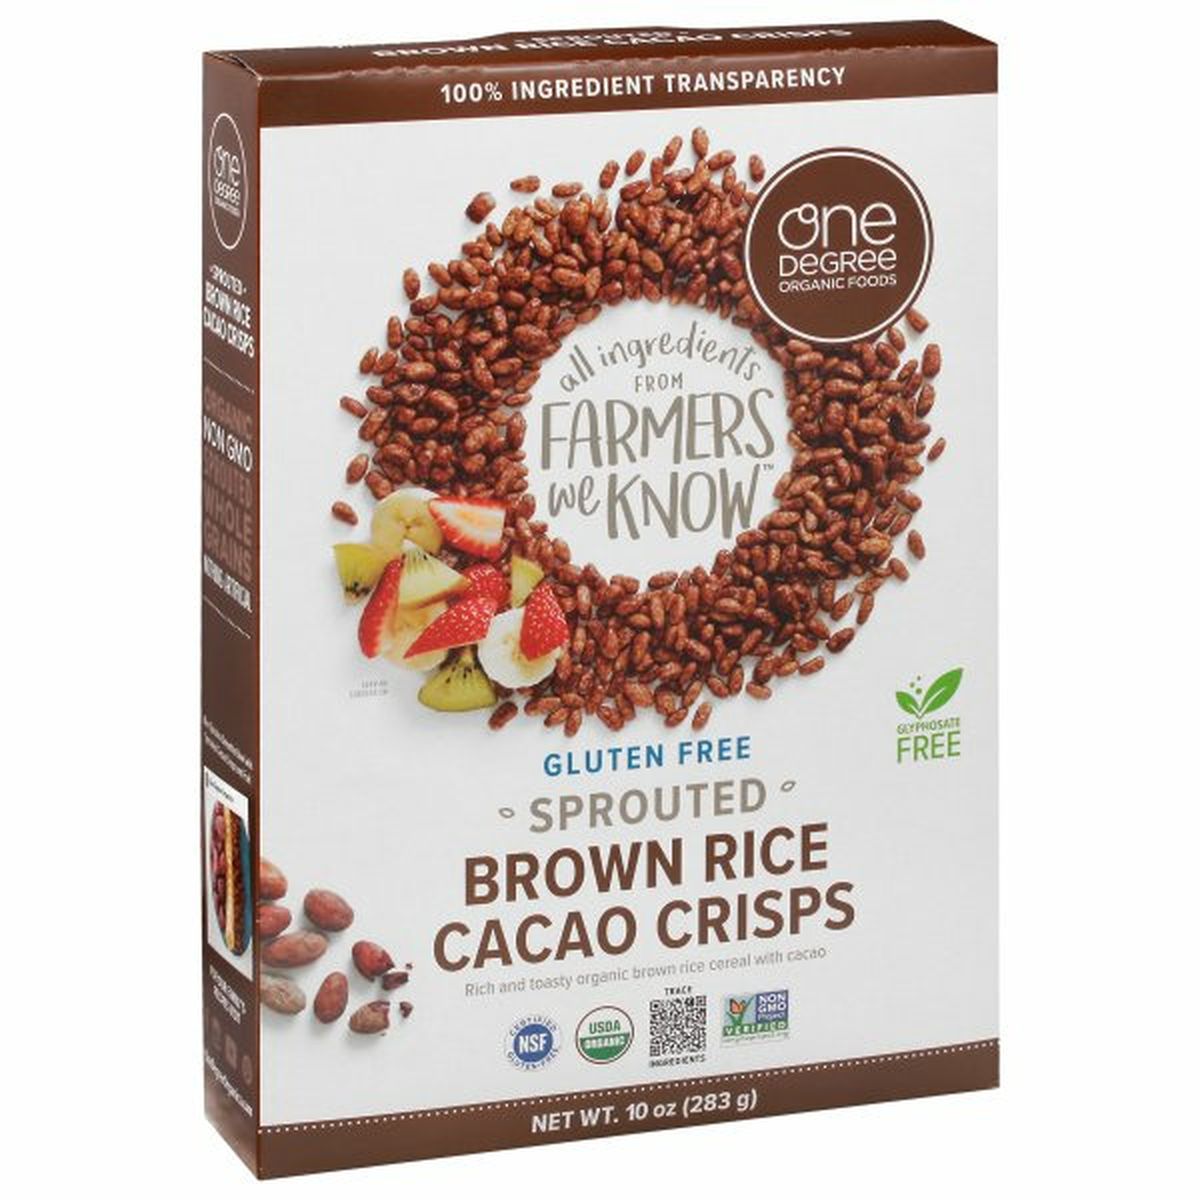 Calories in One Degree Organic Foods Brown Rice Cacao Crisps, Gluten Free, Sprouted